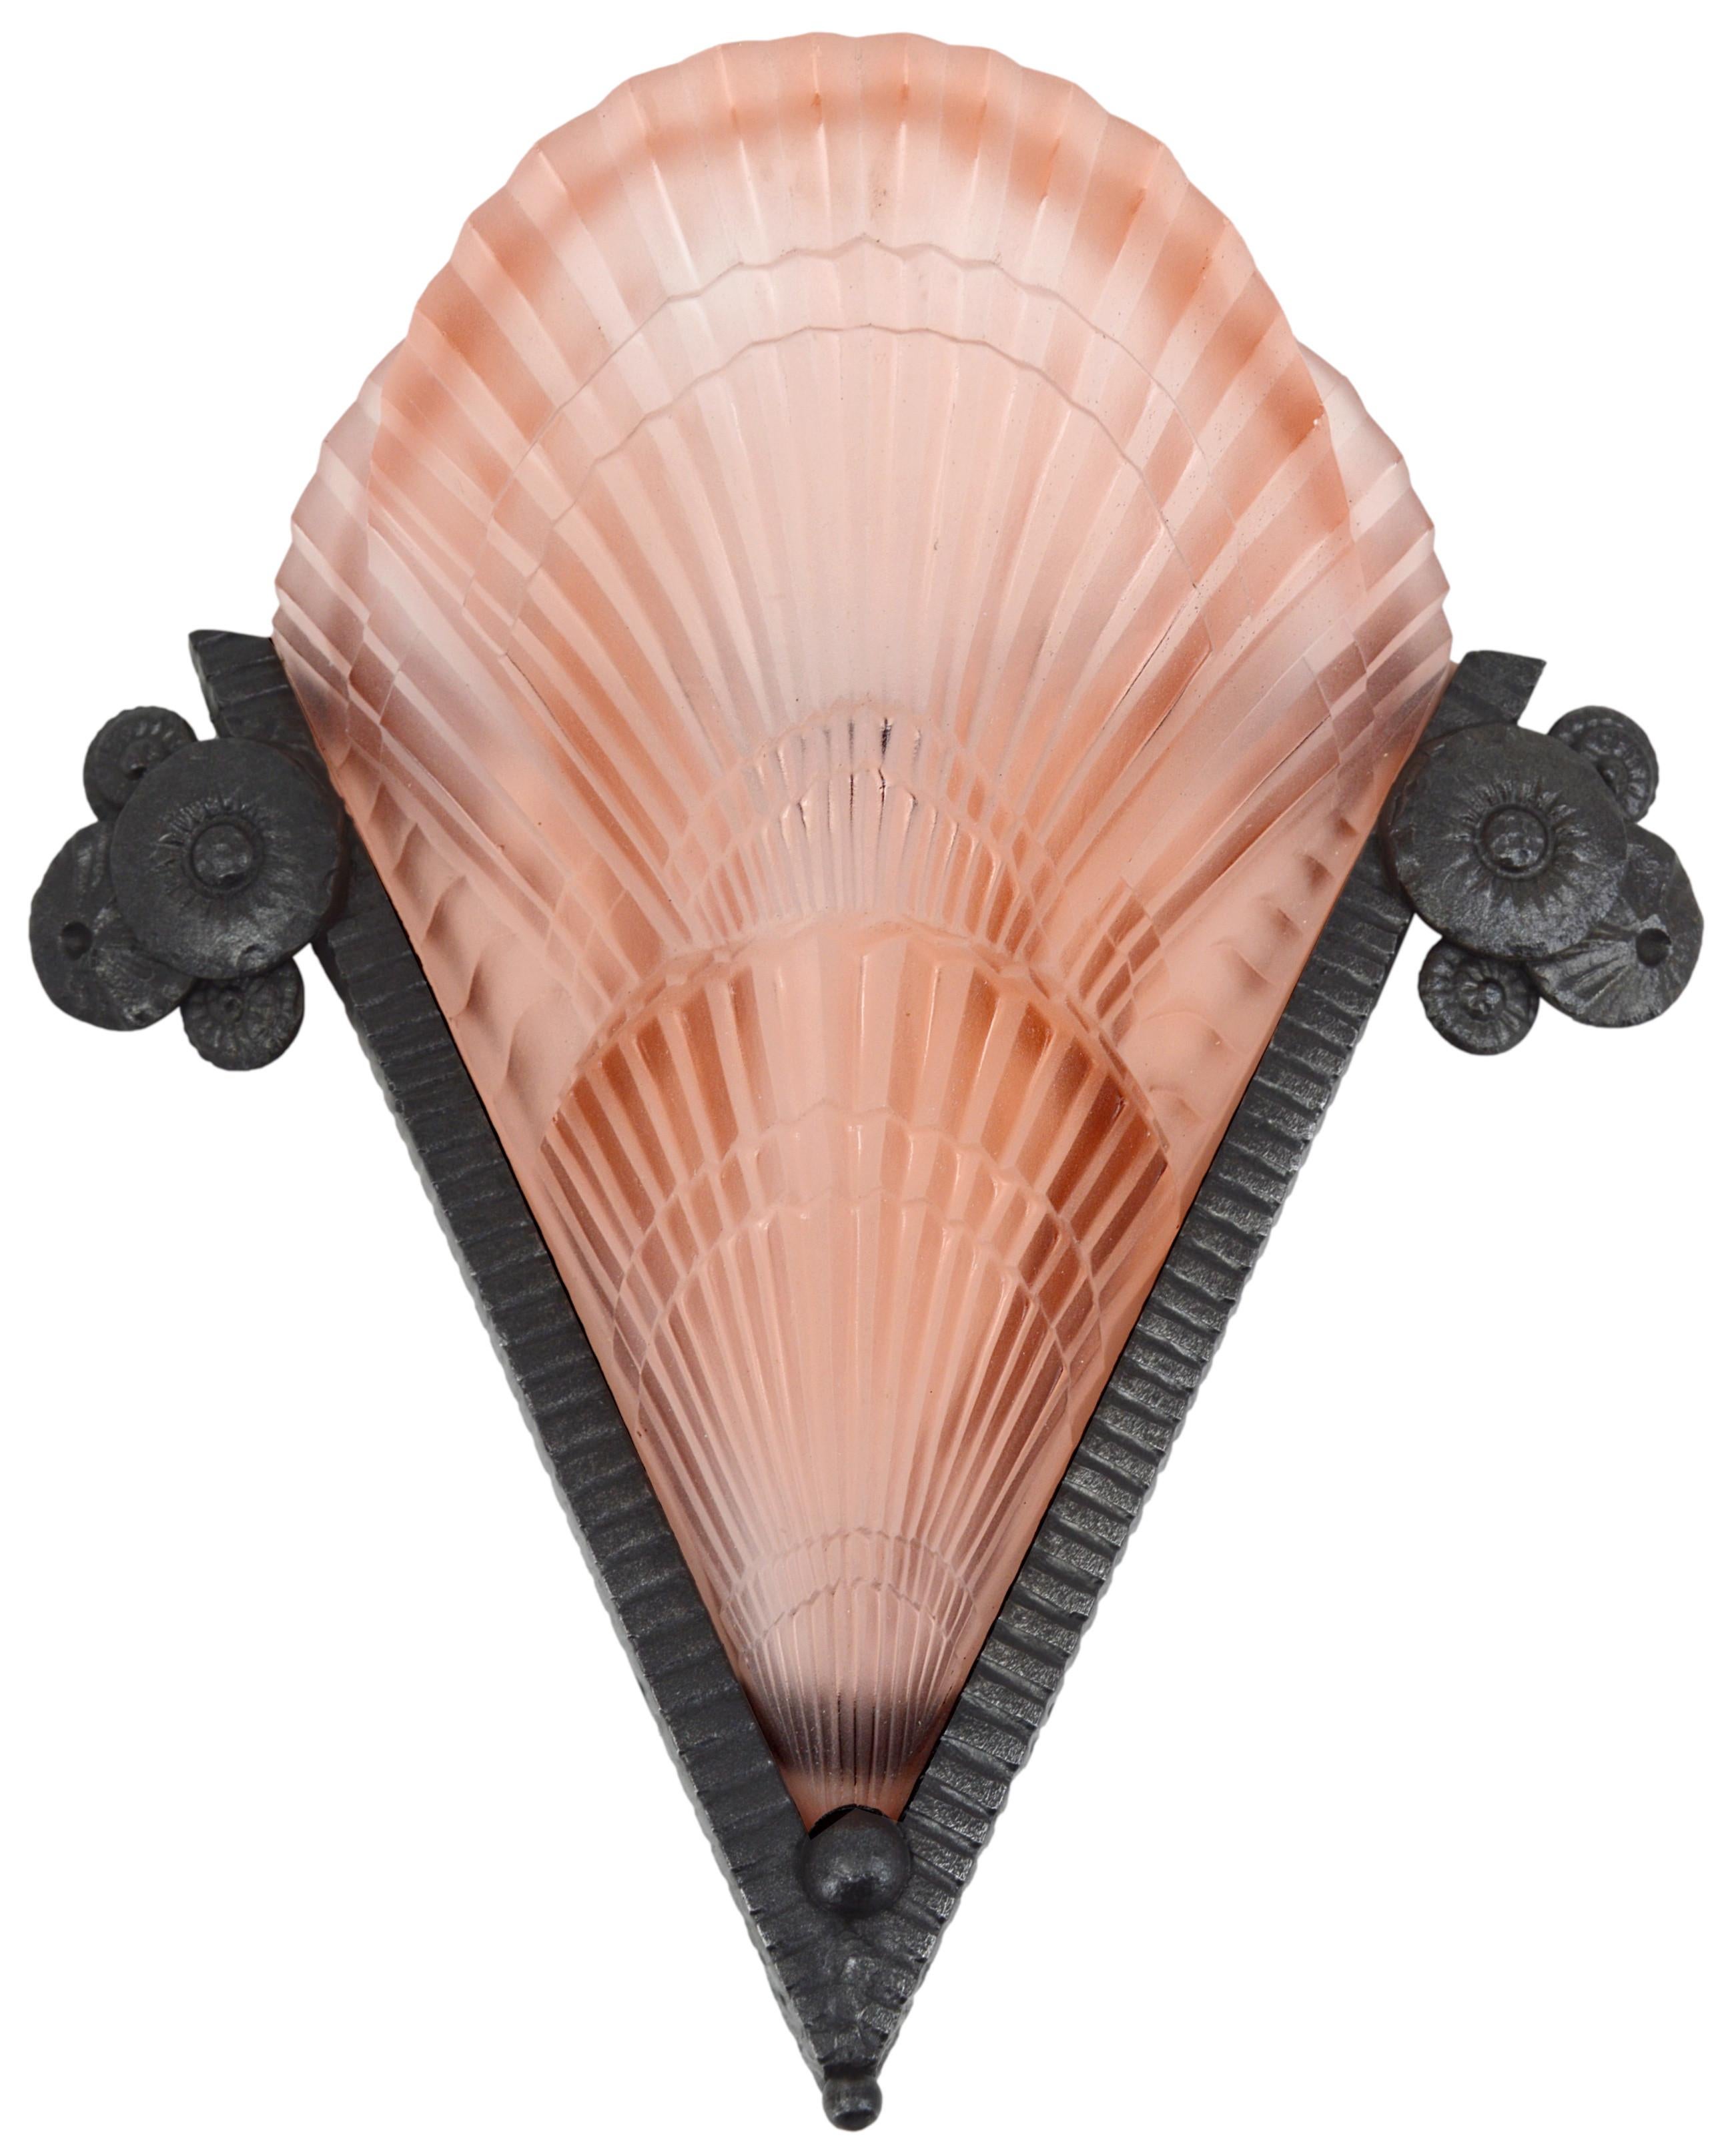 French Art Deco pair of wall sconces by Jean Noverdy (Dijon) and Marcel Vasseur (Paris). Thick pink molded glass shades by Noverdy. Wrought-iron backplates by Marcel Vasseur. Each - height : 12.2